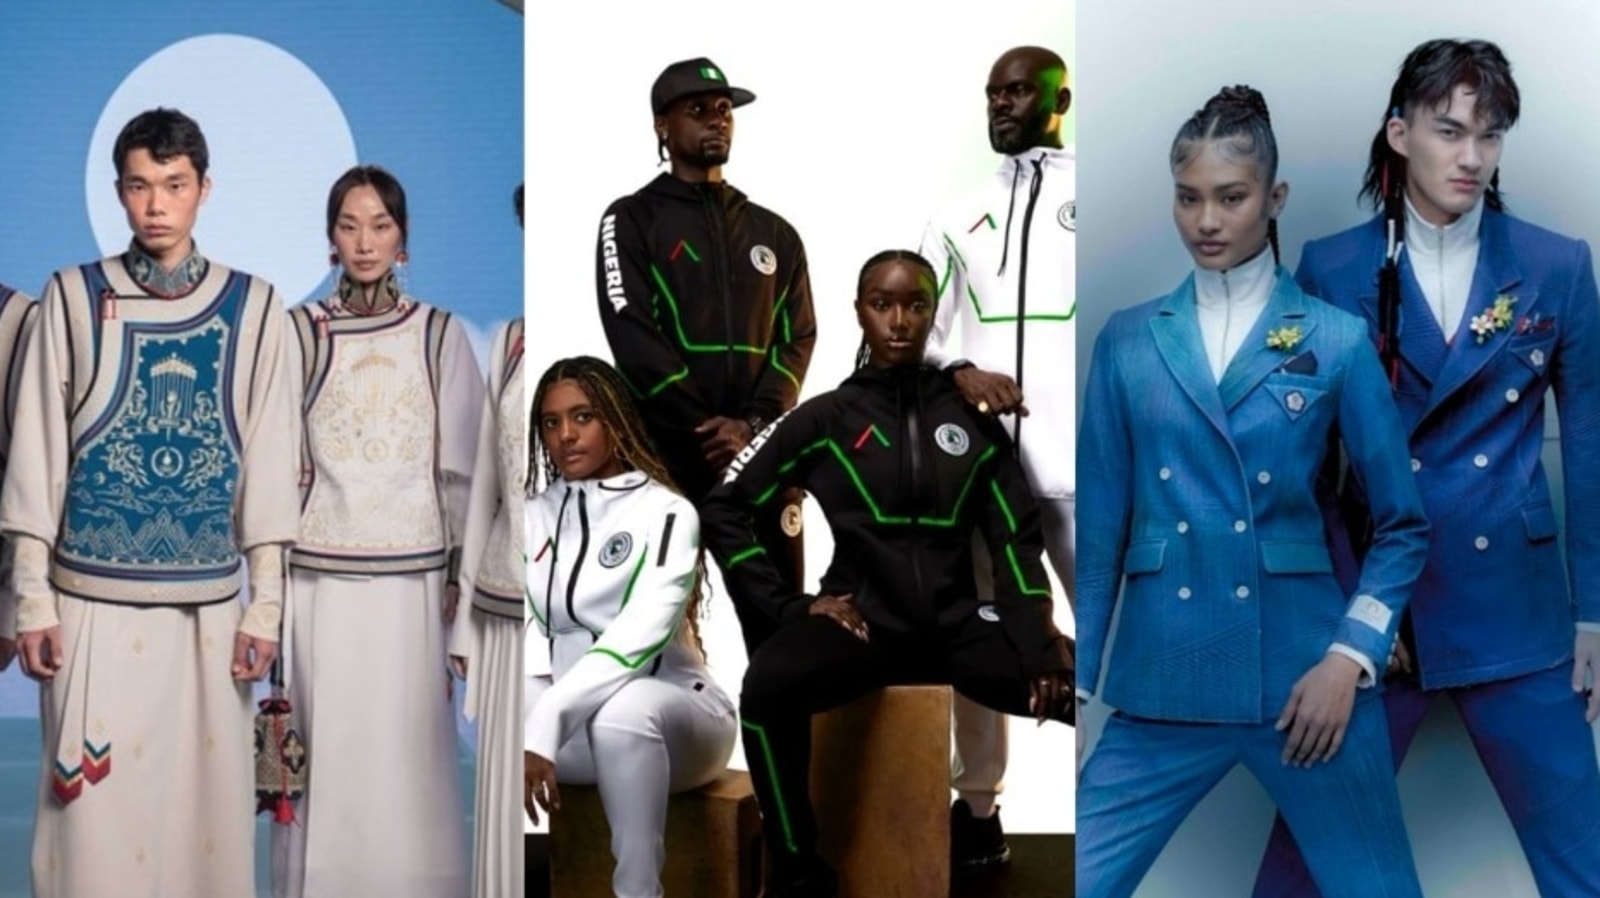 Olympics 2024 fashion spotlight: Classic to bold, top 10 best team costumes that you need to see